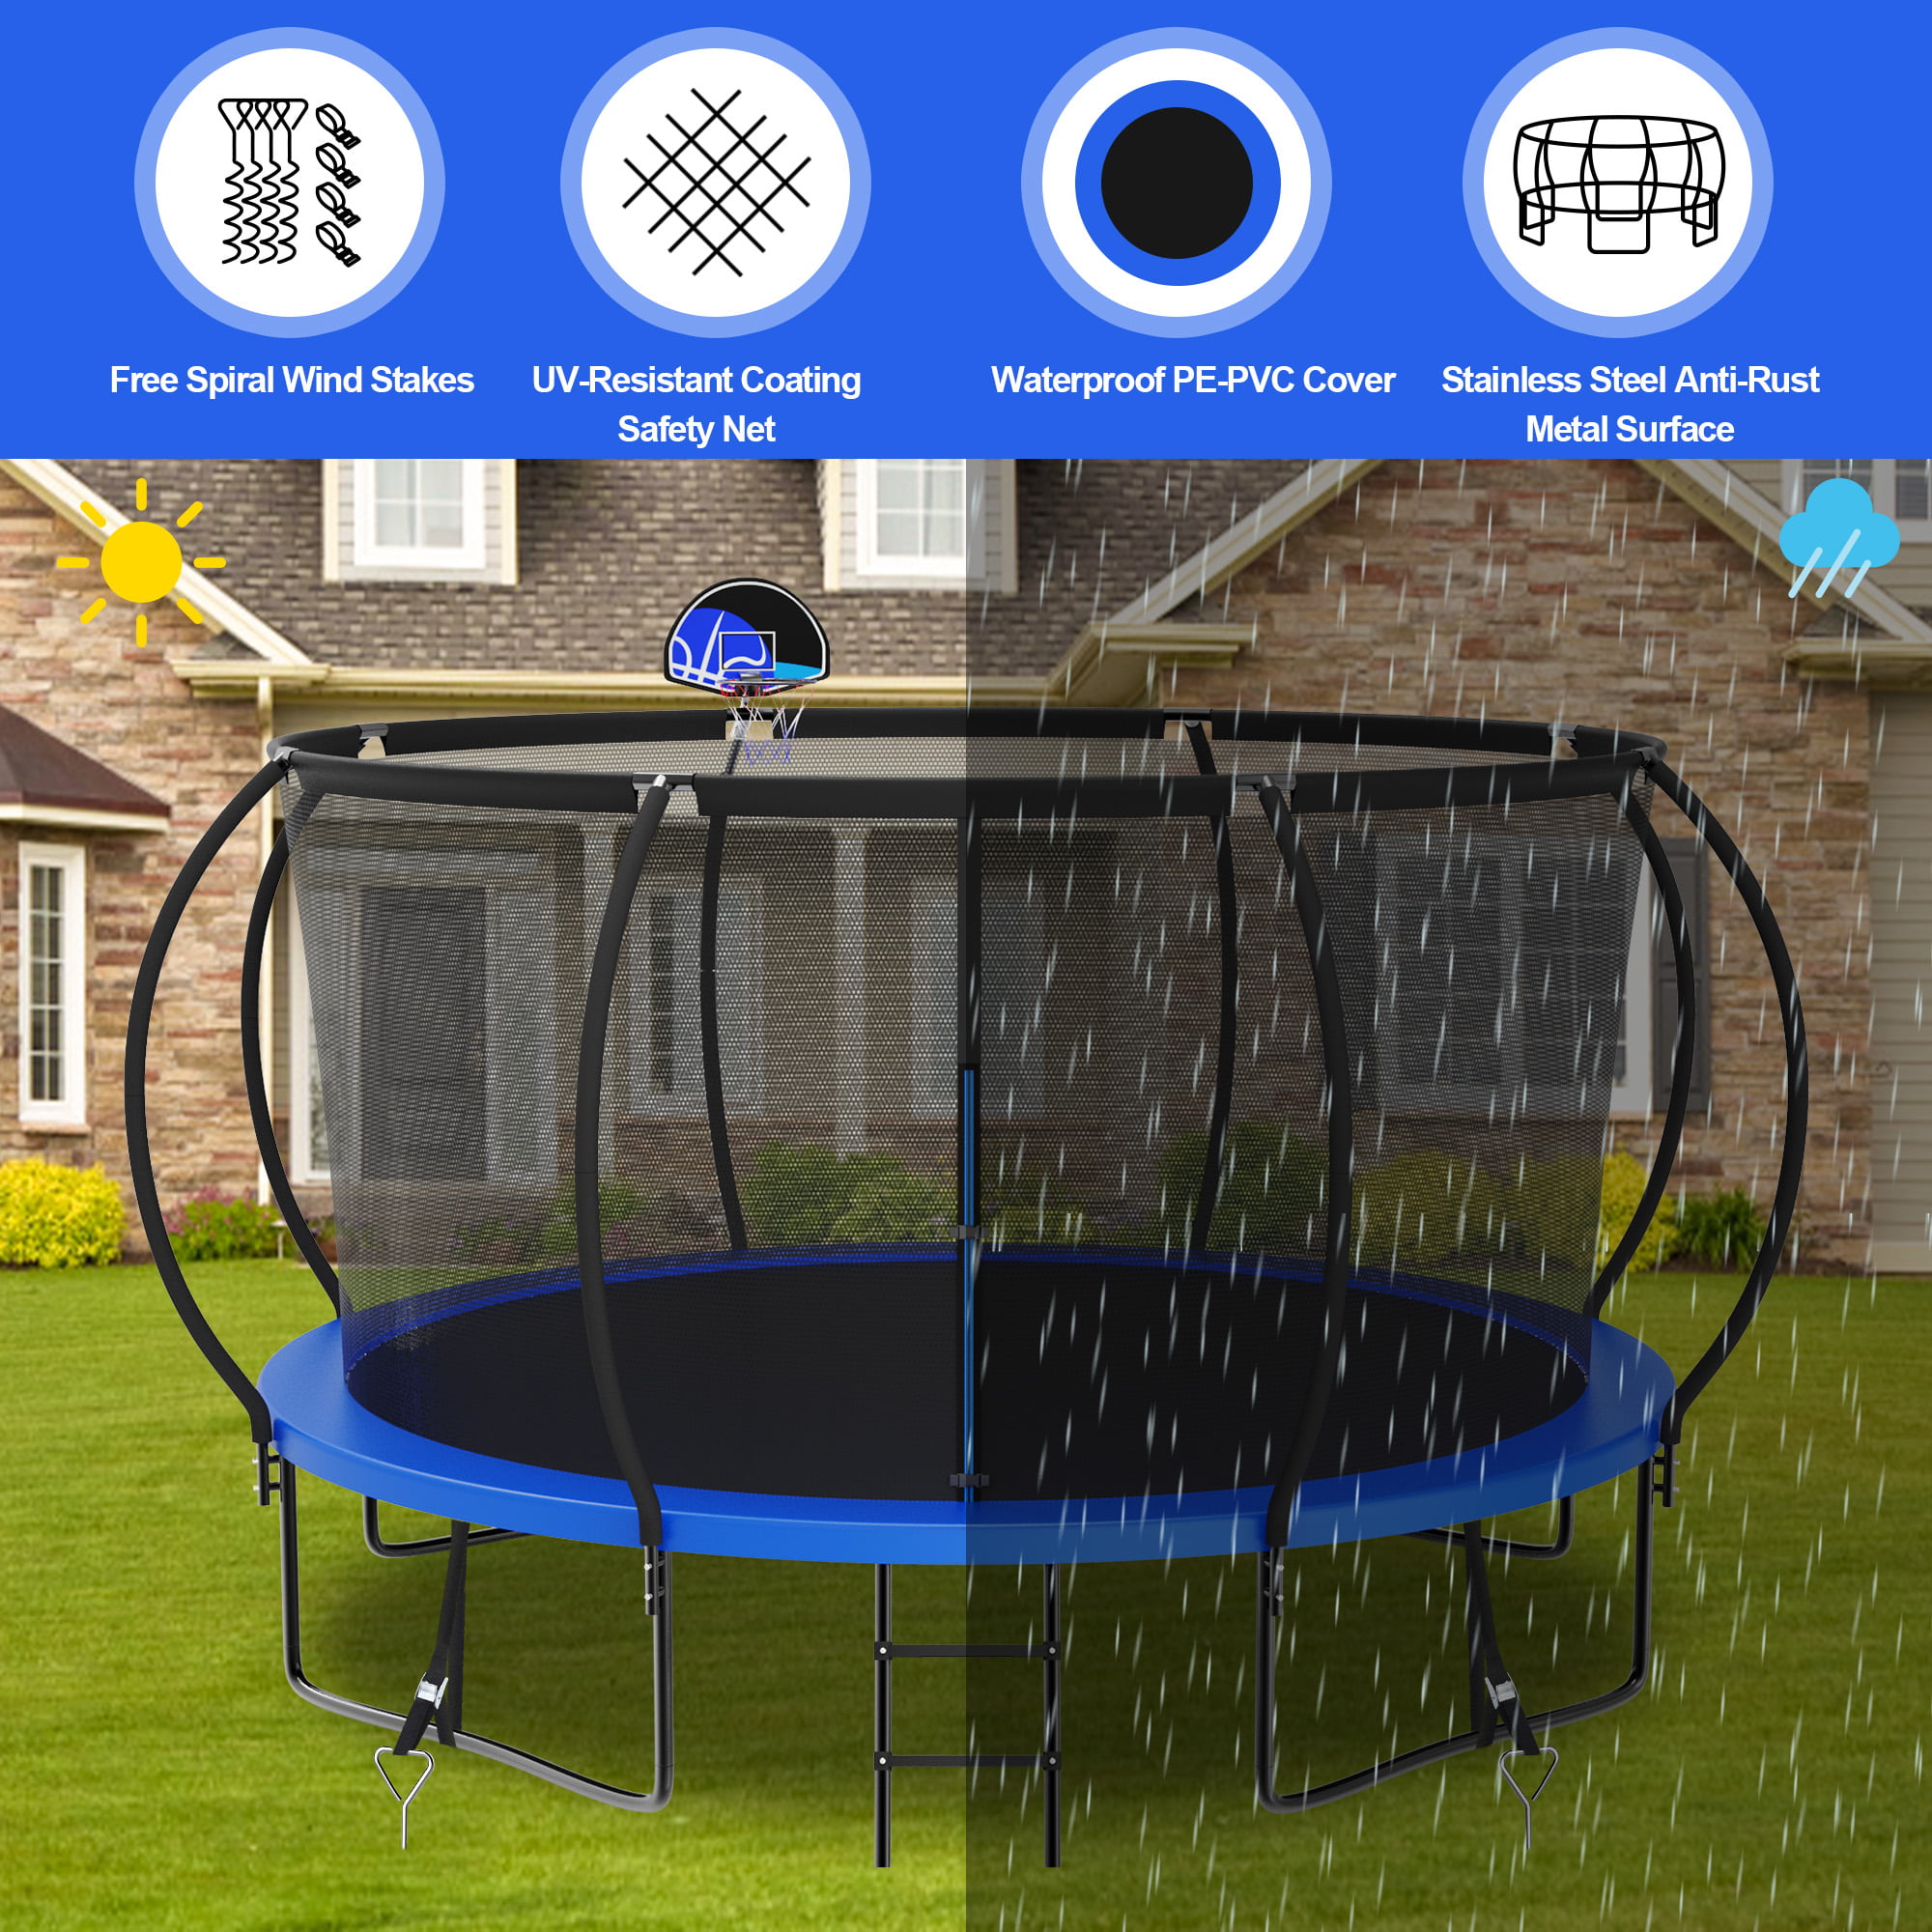 KOFUN12FT Trampoline for Kids and Adults, 1200LBS Round Backyard Trampoline with Enclosure Net and Hoop, ASTM CPC Approved, Trampoline with Lights and Sprinklers, Poles, Blue - Walmart.com